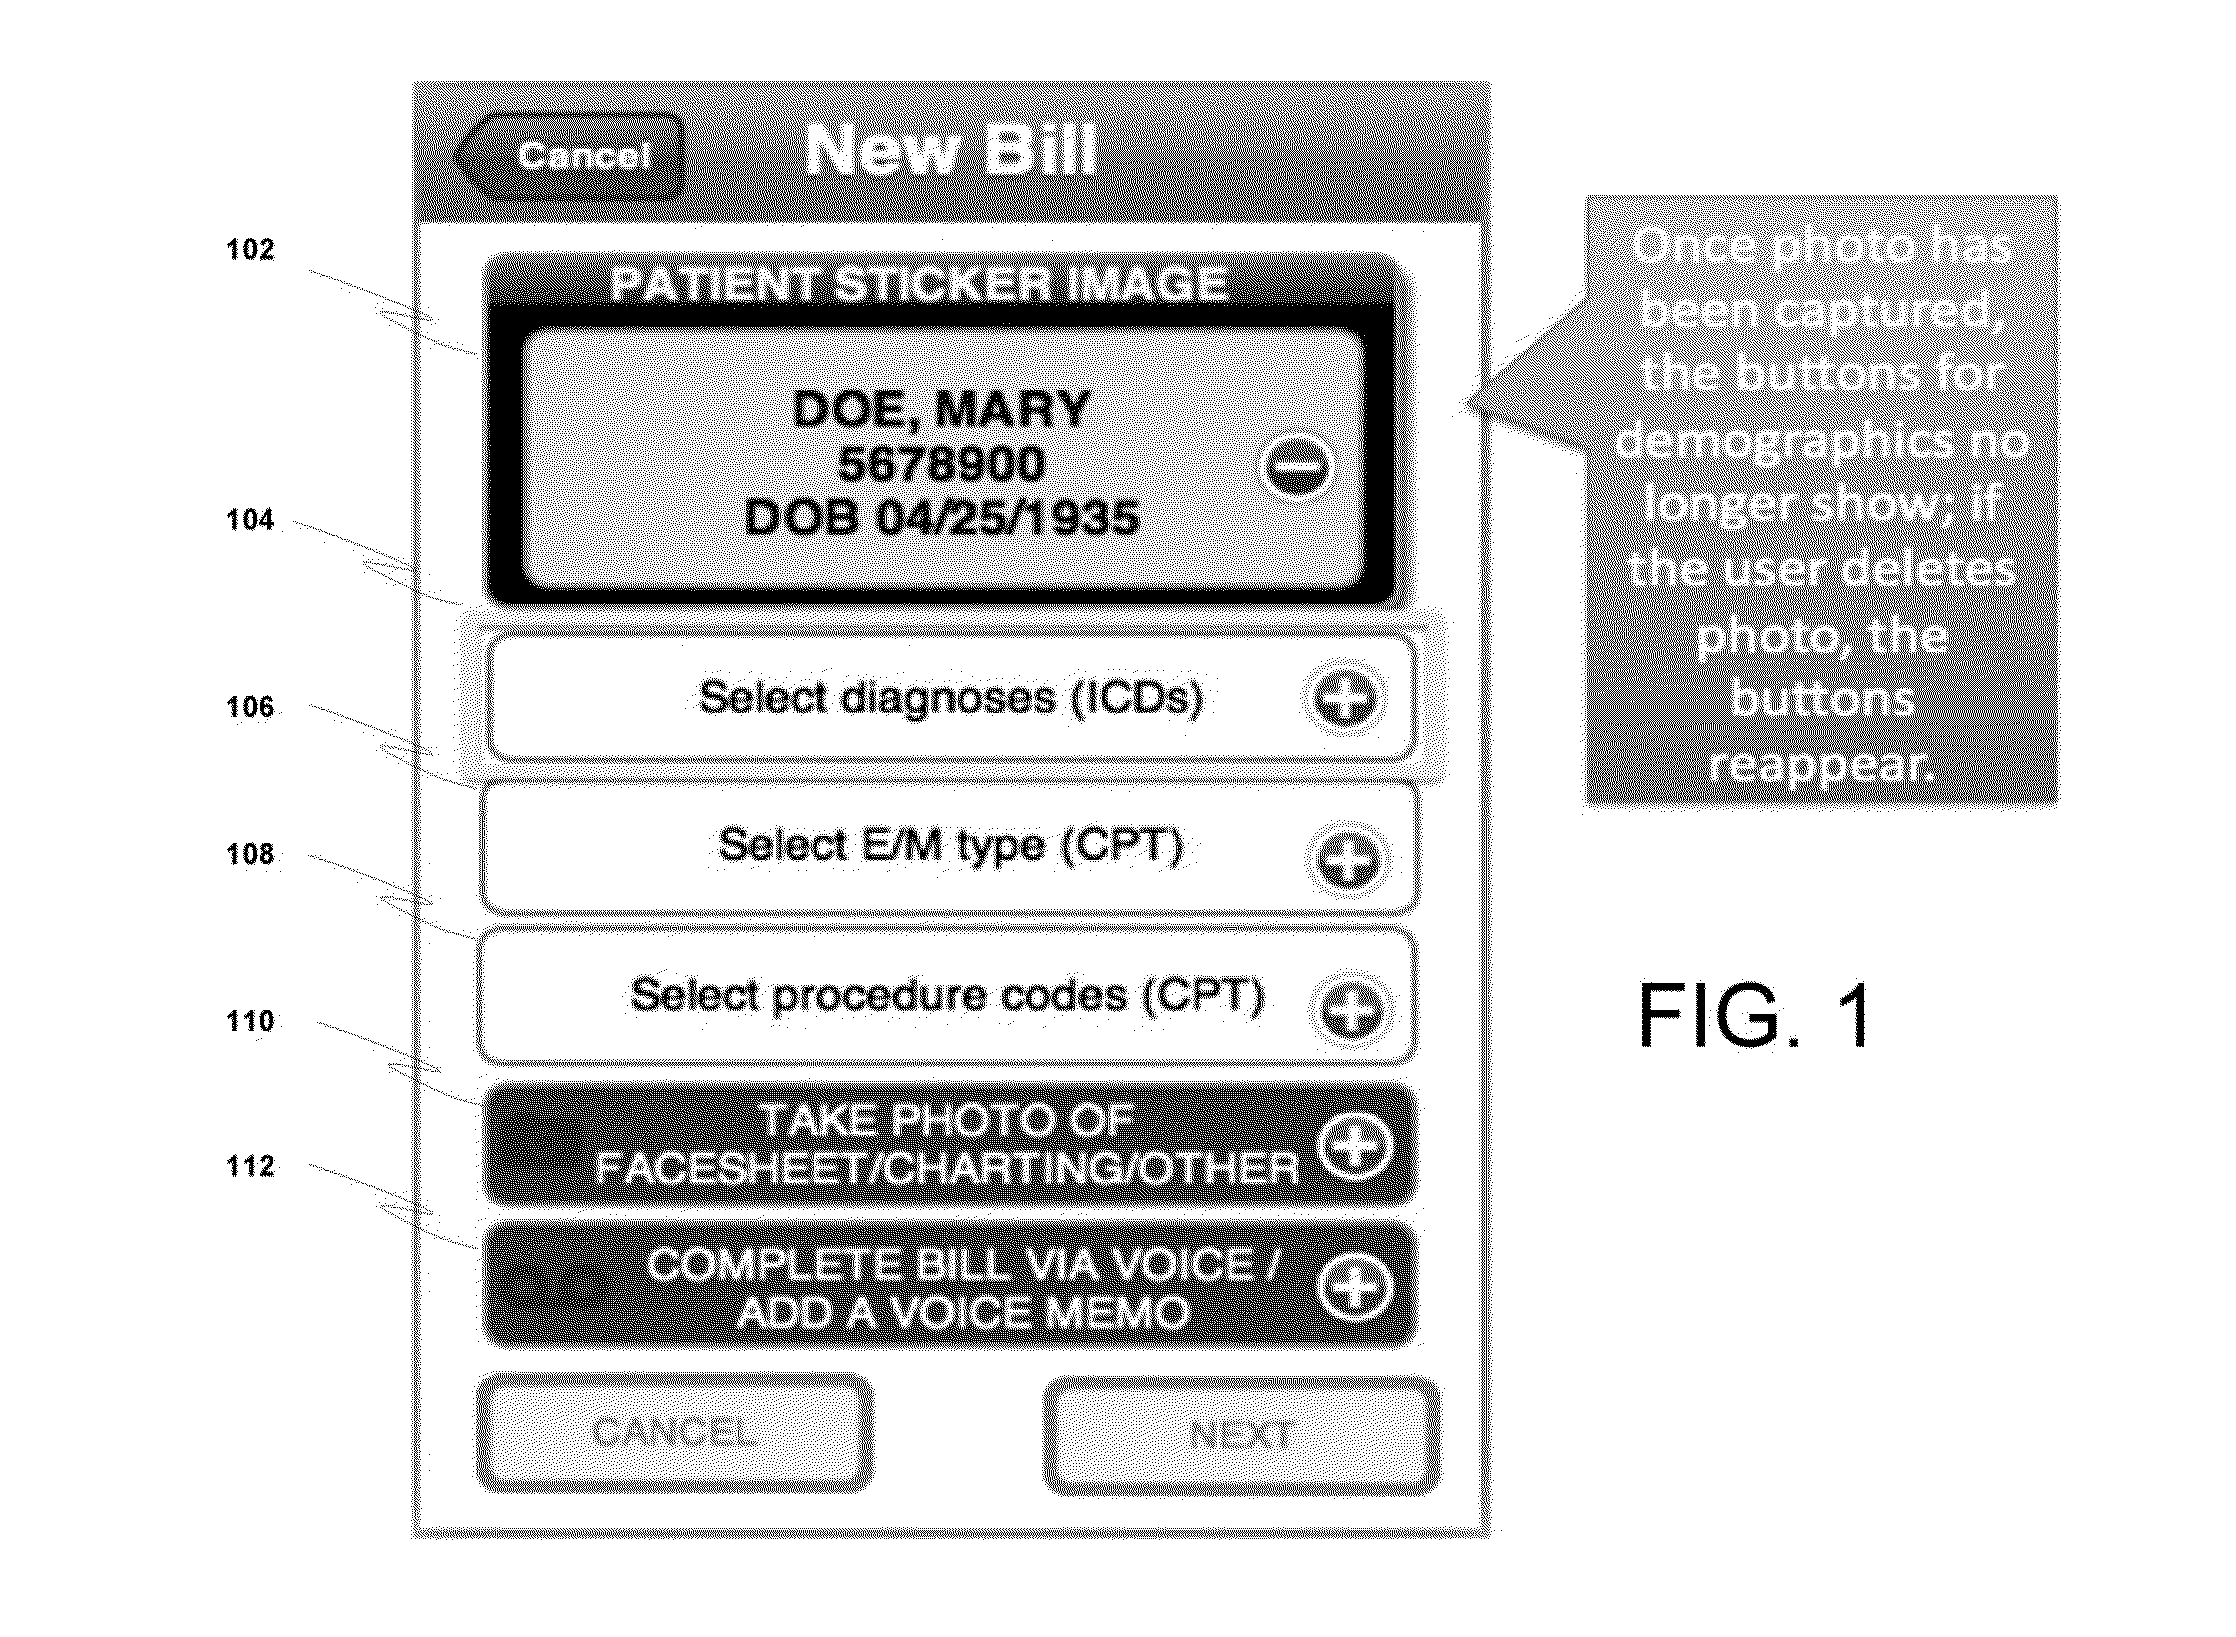 Protected health information voice data and / or transcript of voice data capture, processing and submission